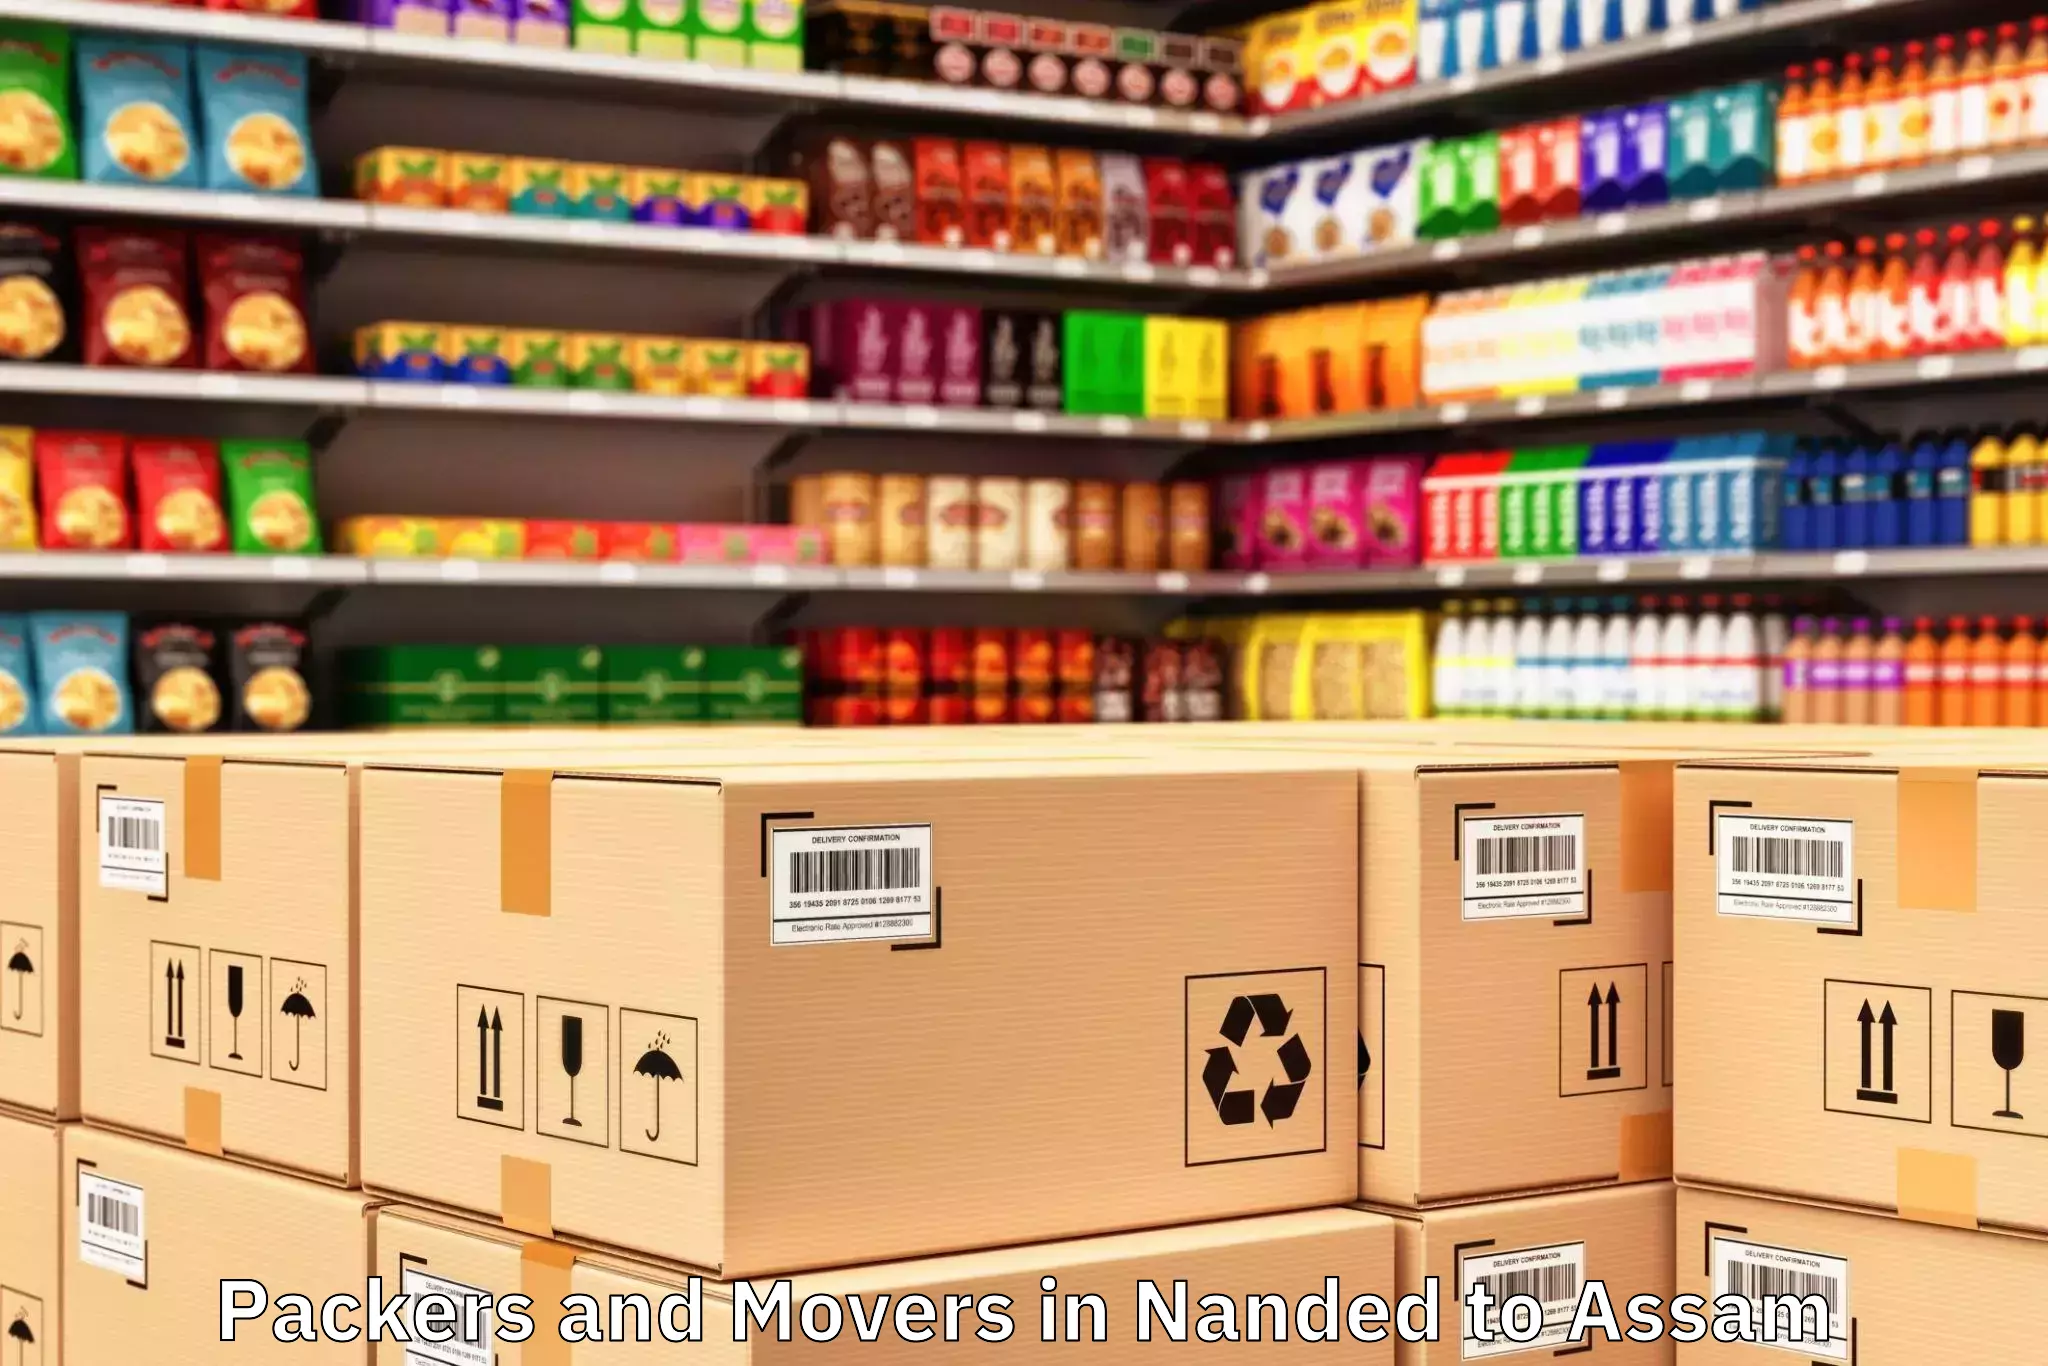 Reliable Nanded to Sivasagar Packers And Movers